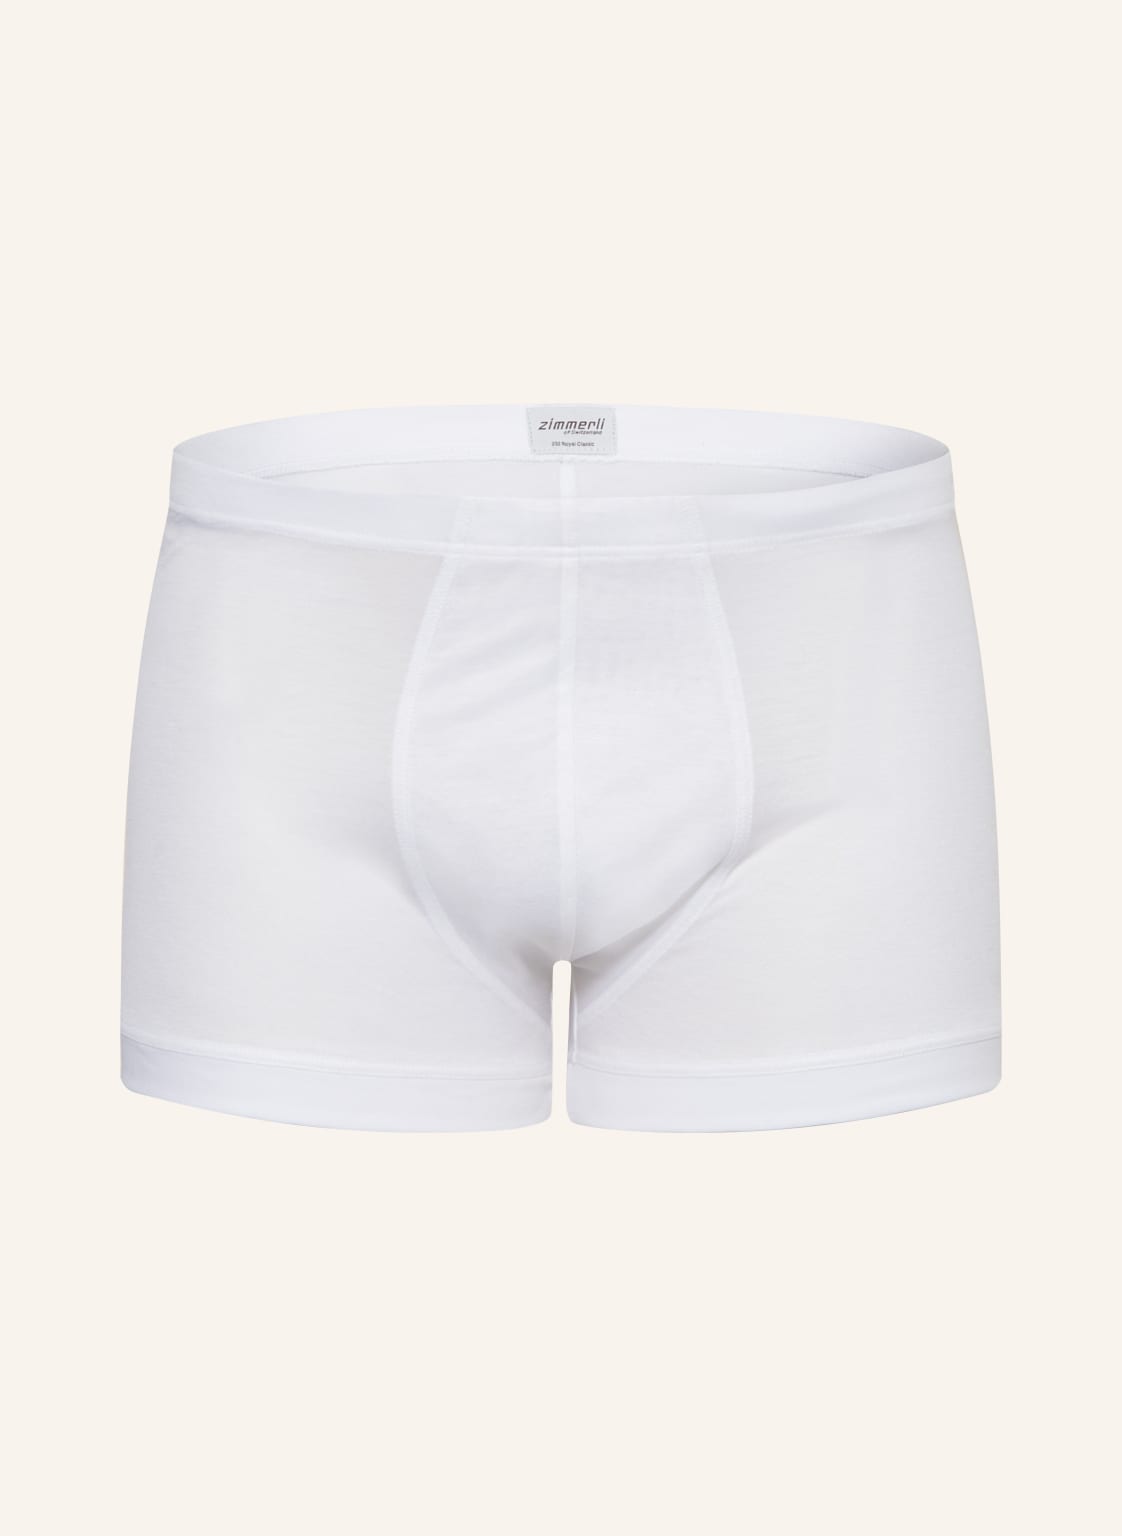 Image of Zimmerli Boxershorts Royal Classic weiss